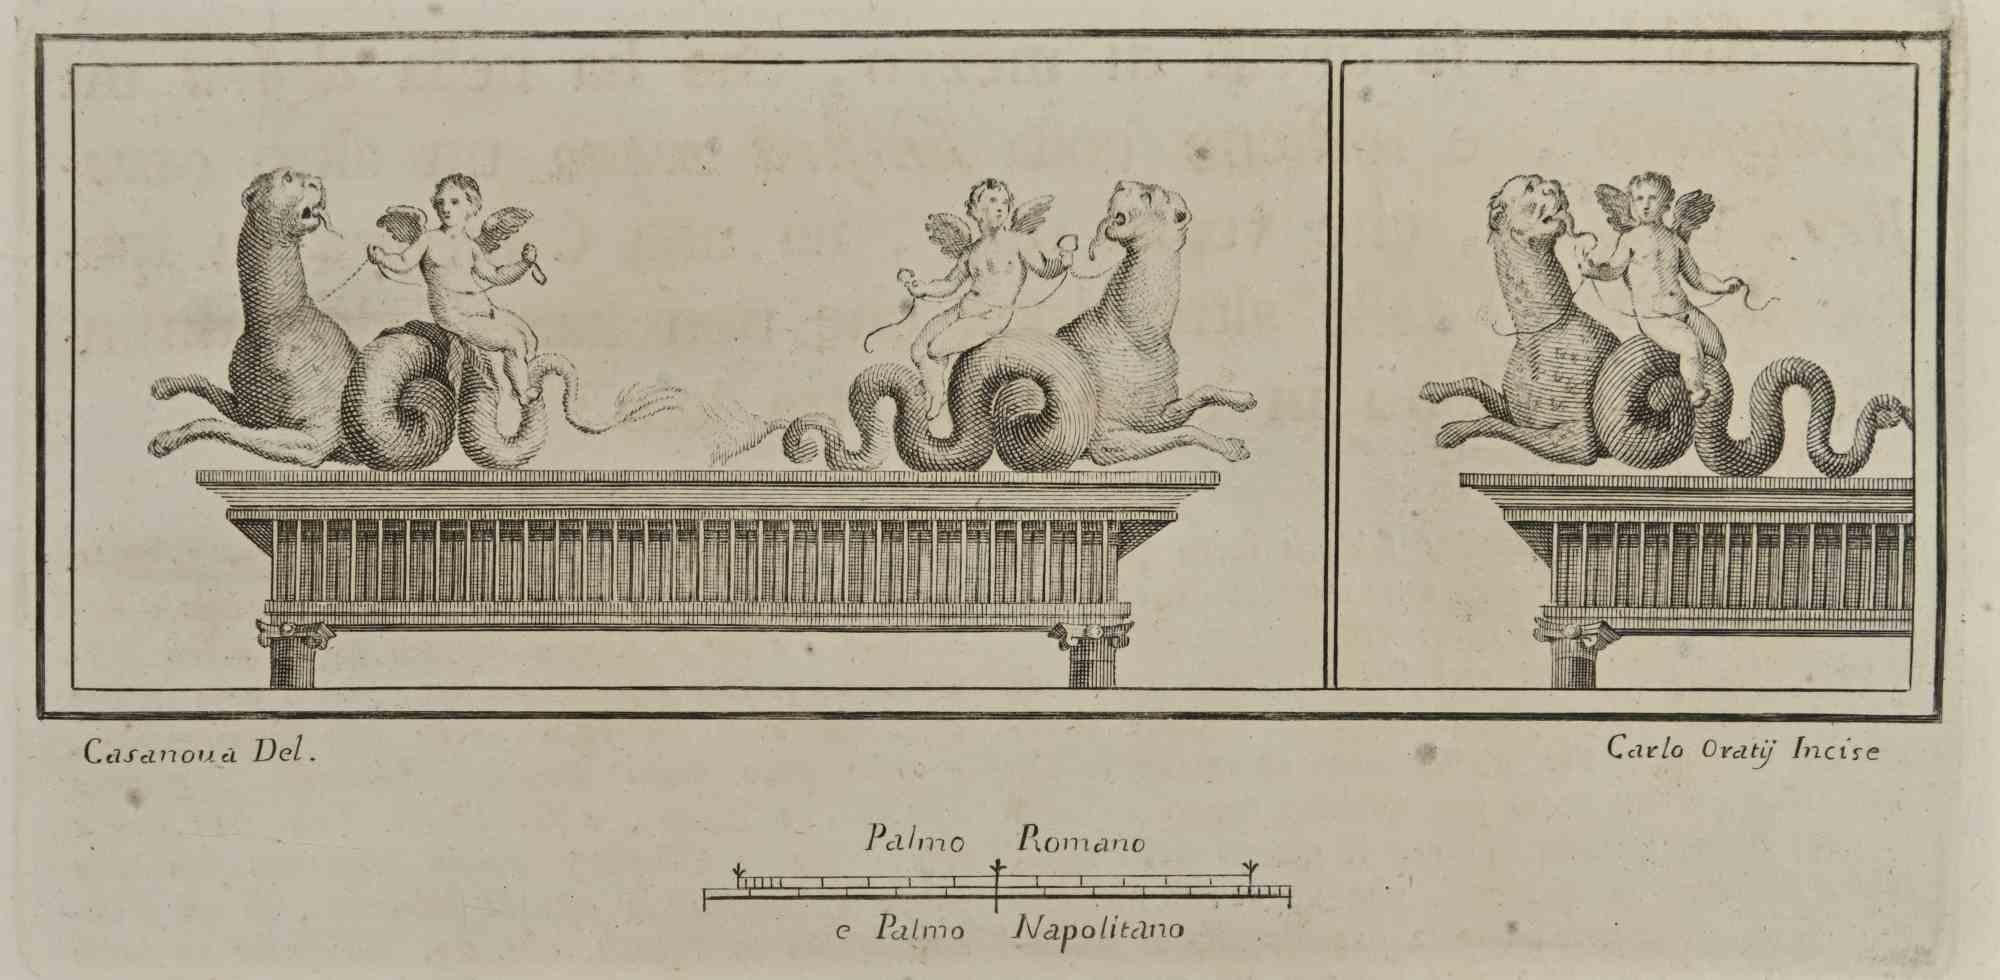 Cupid Riding Sea Creatures from "Antiquities of Herculaneum" is an etching on paper realized by Carlo Oraty in the 18th Century.

Signed on the plate.

Good conditions.

The etching belongs to the print suite “Antiquities of Herculaneum Exposed”